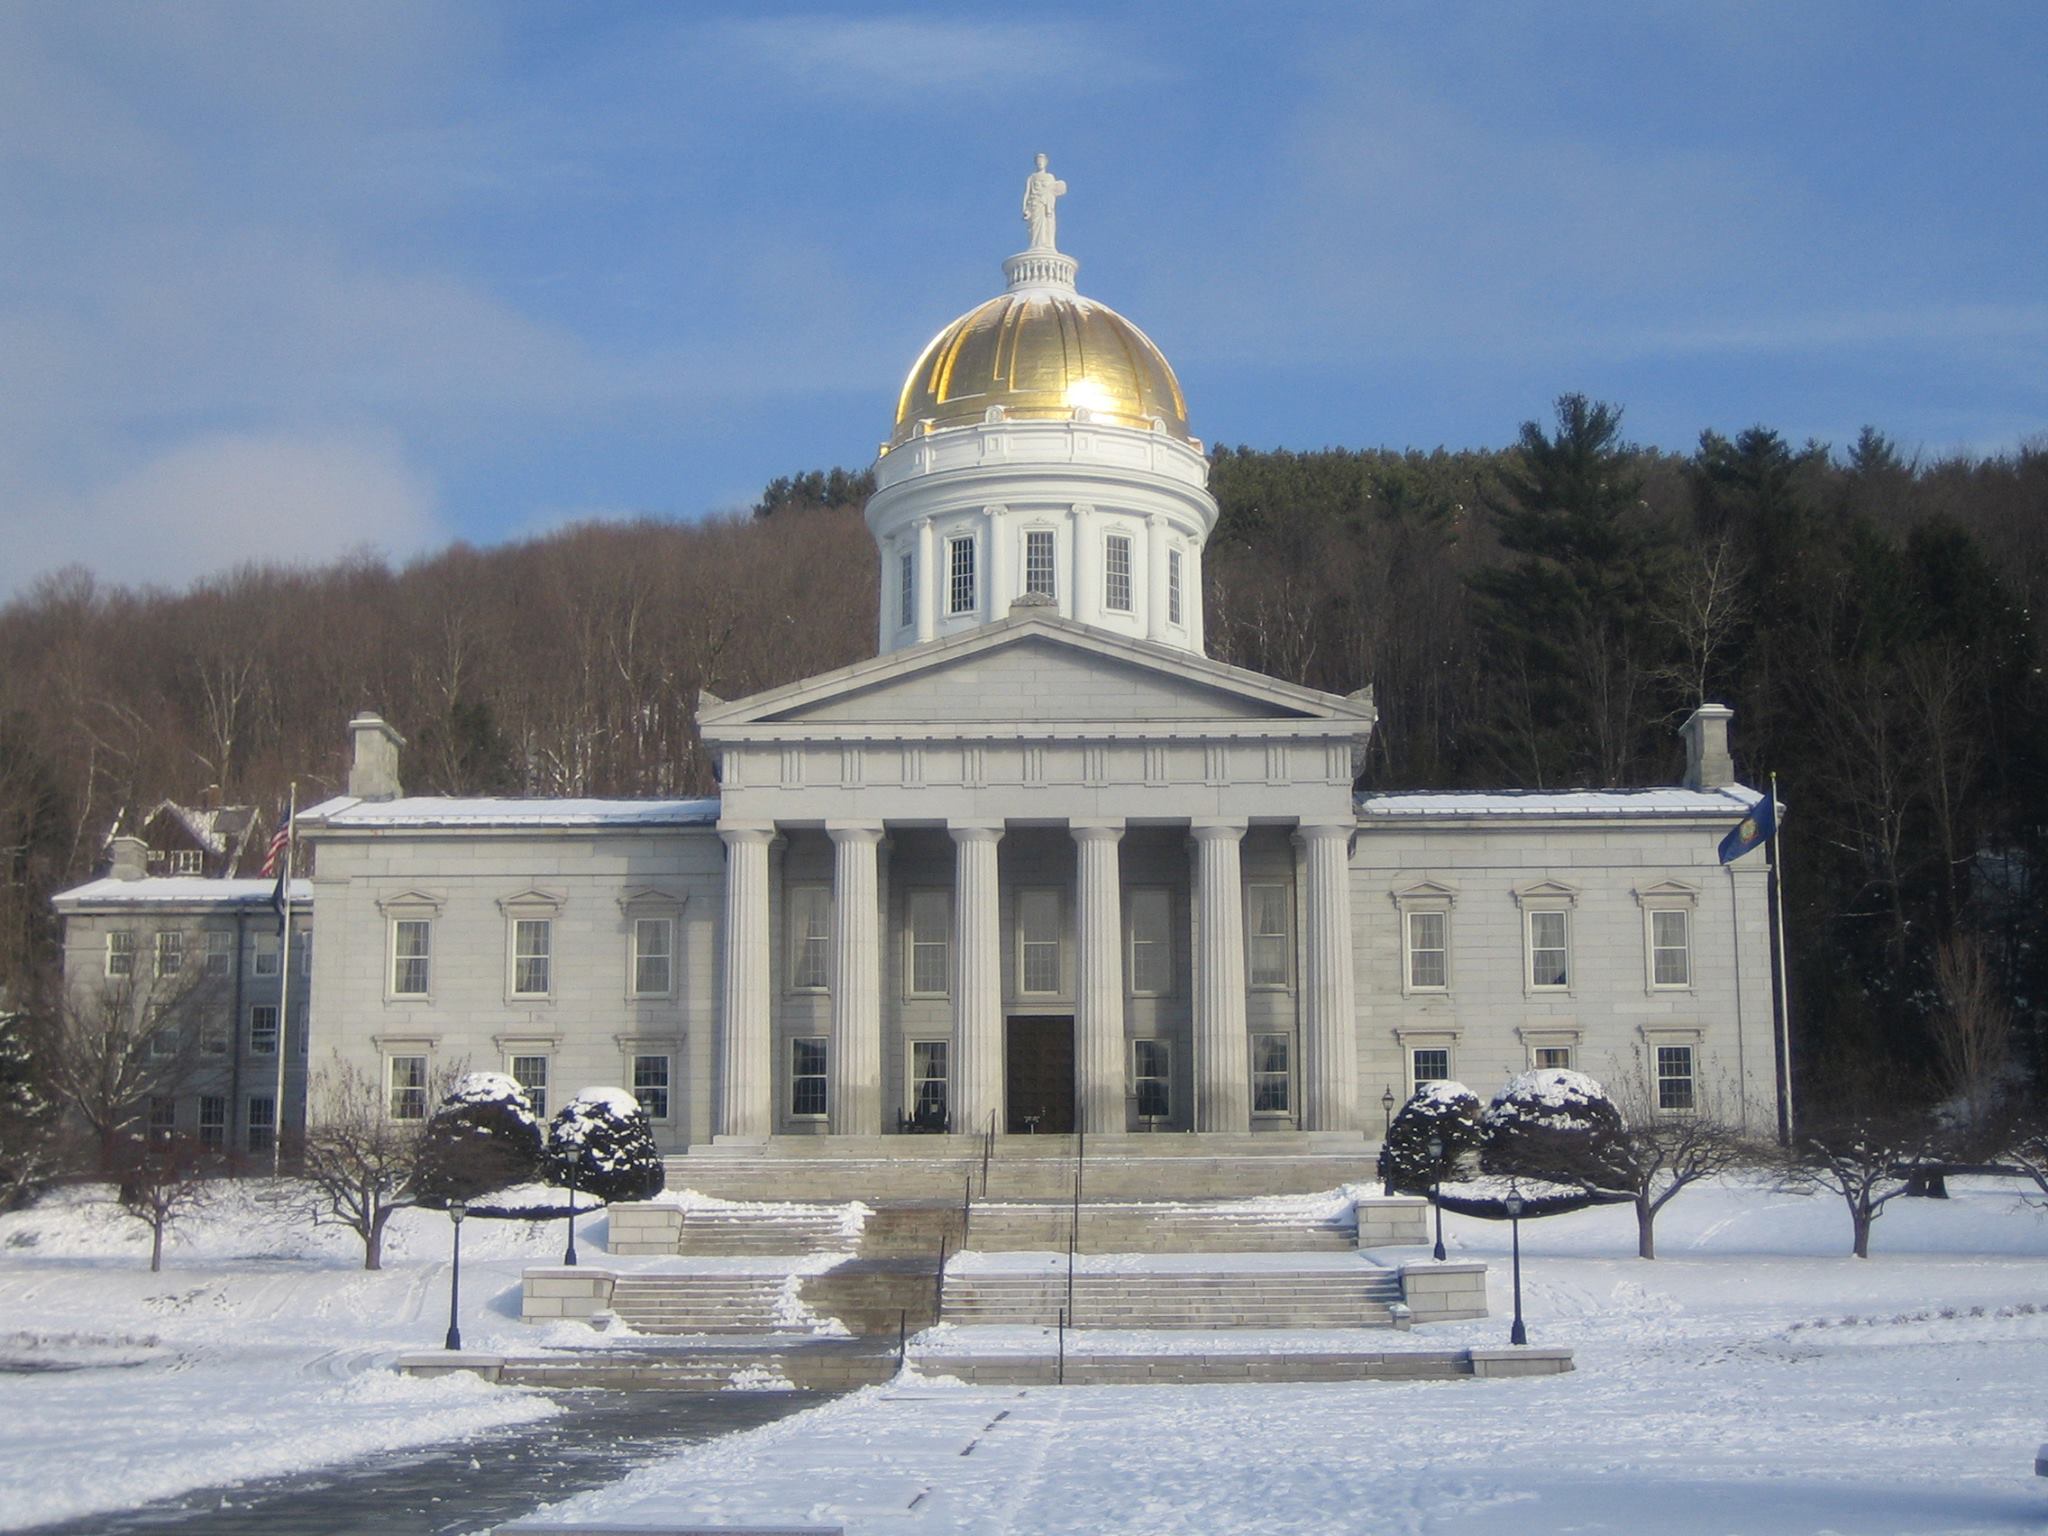 Join us for Legislative Day at the Vermont Statehouse in Winter